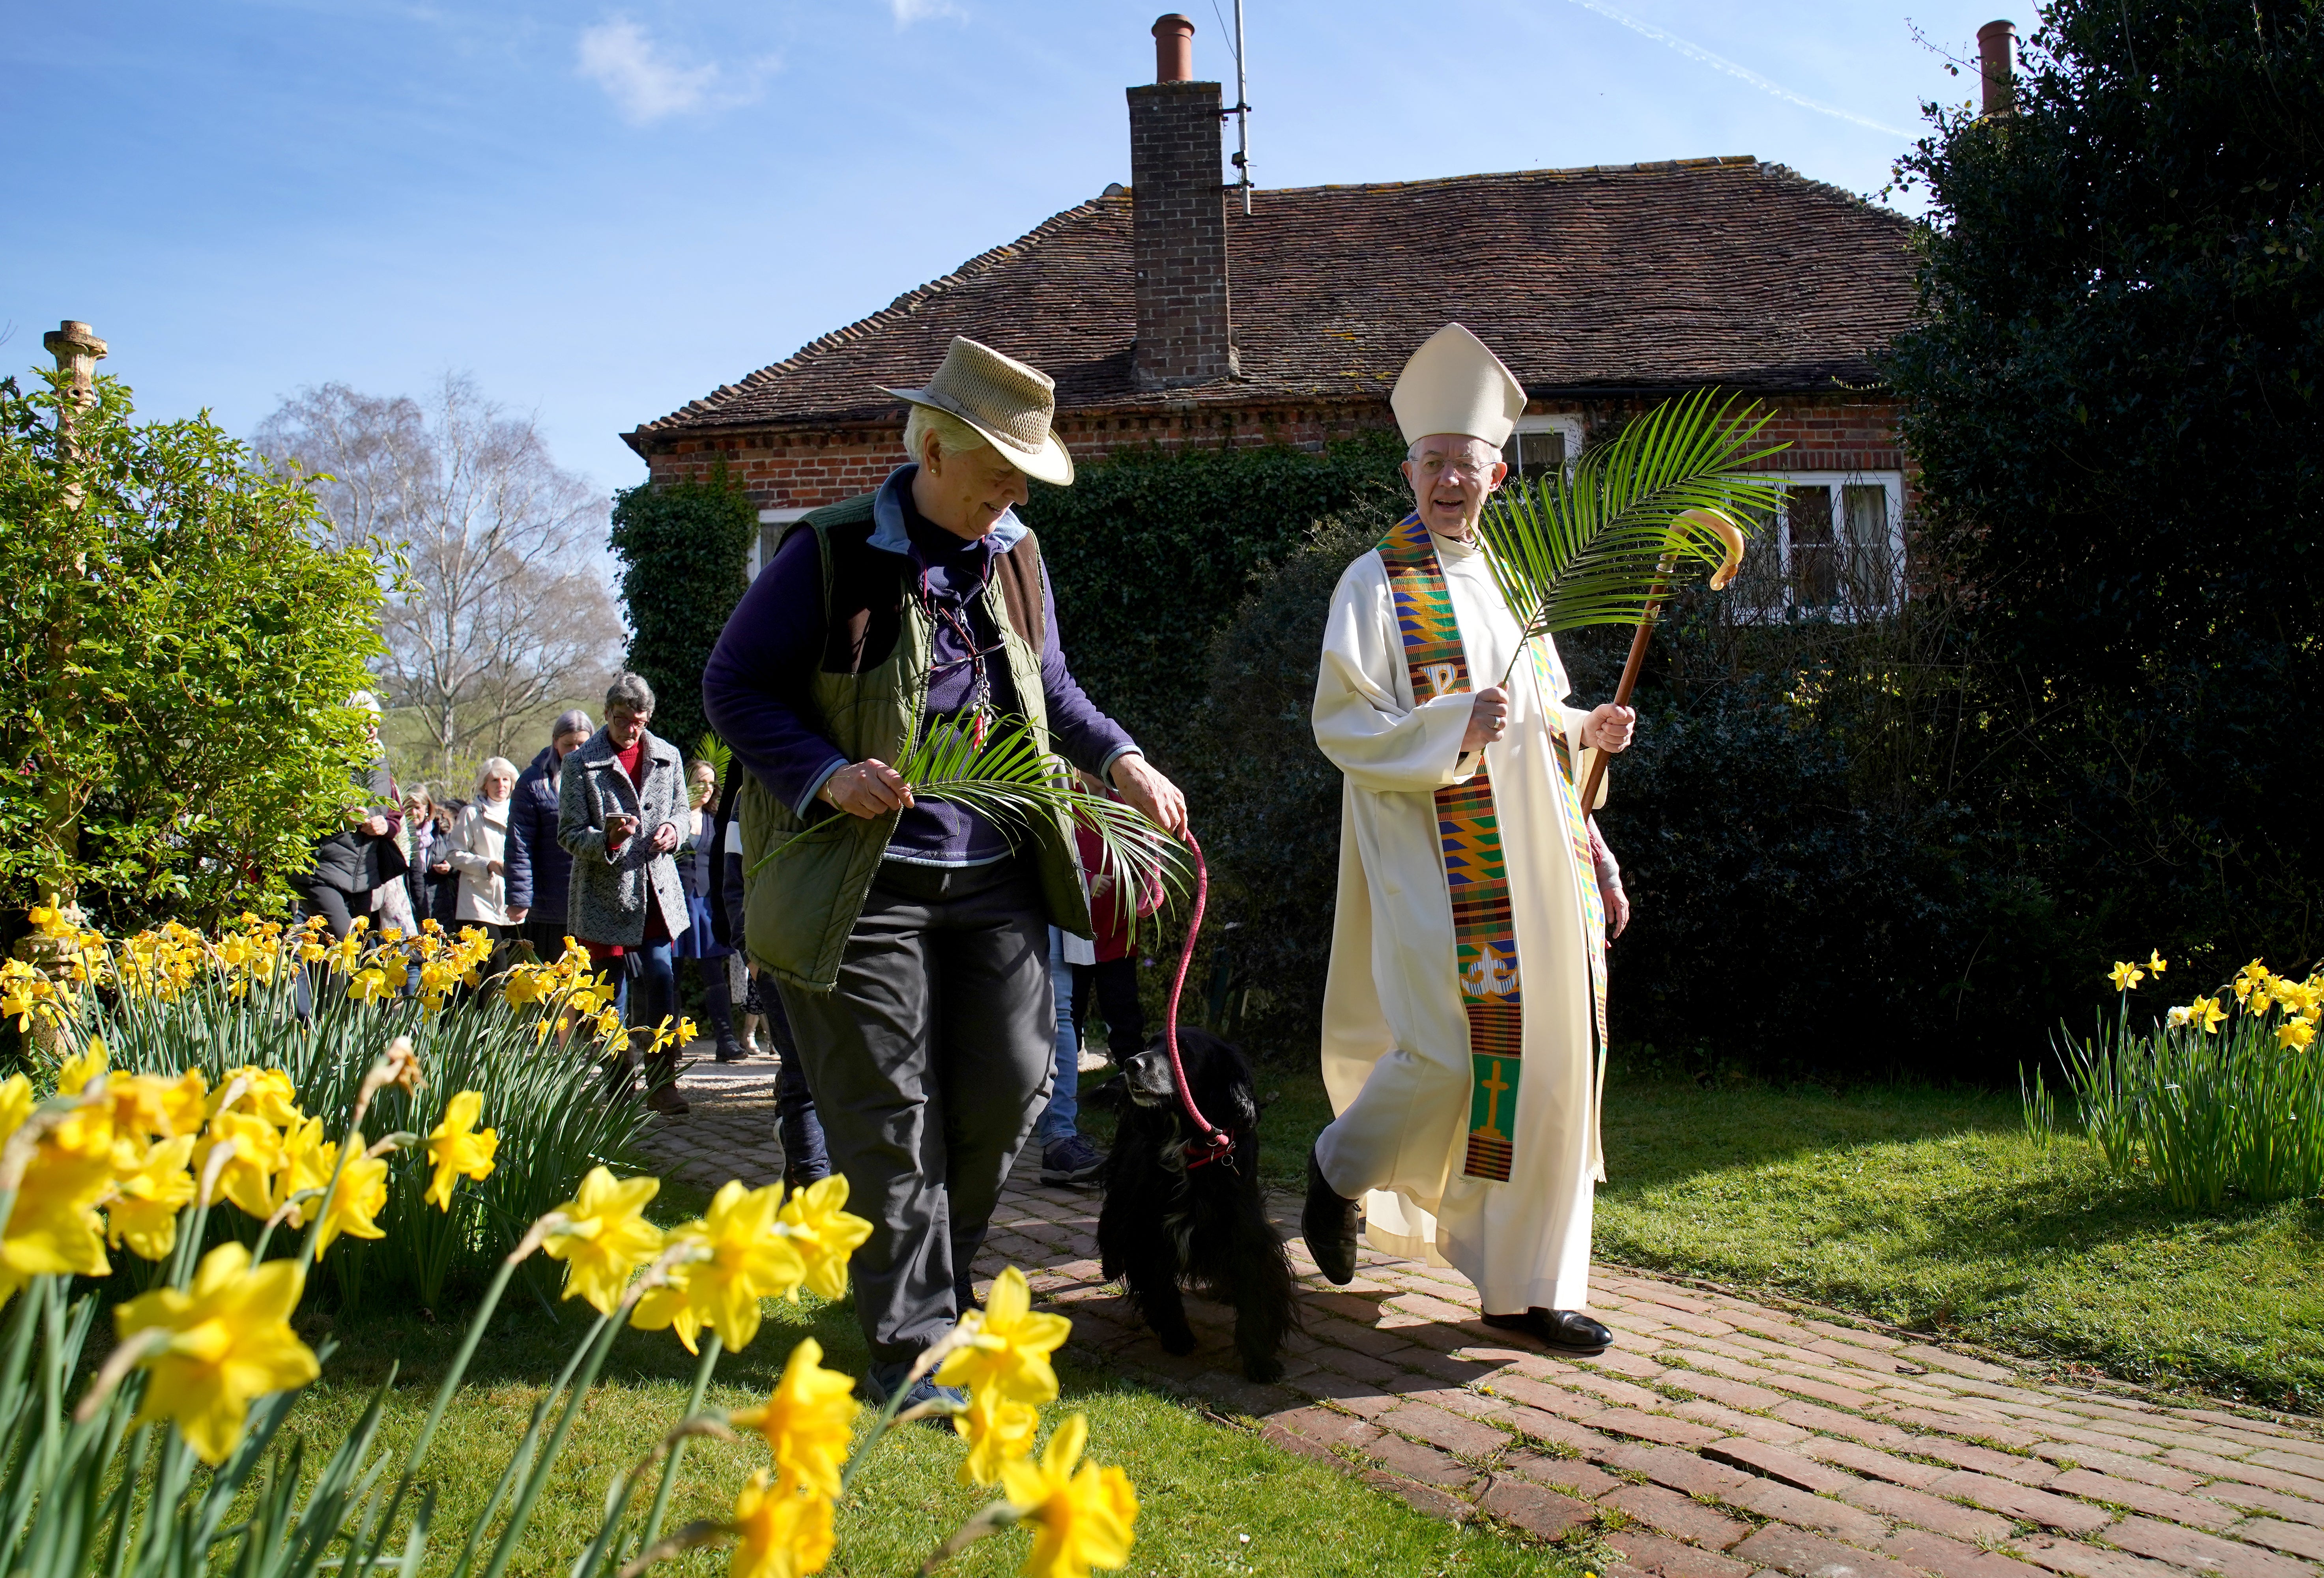 Justin Welby leads a Palm Sunday parade through the village of Brabourne in Ashford (Gareth Fuller/PA)